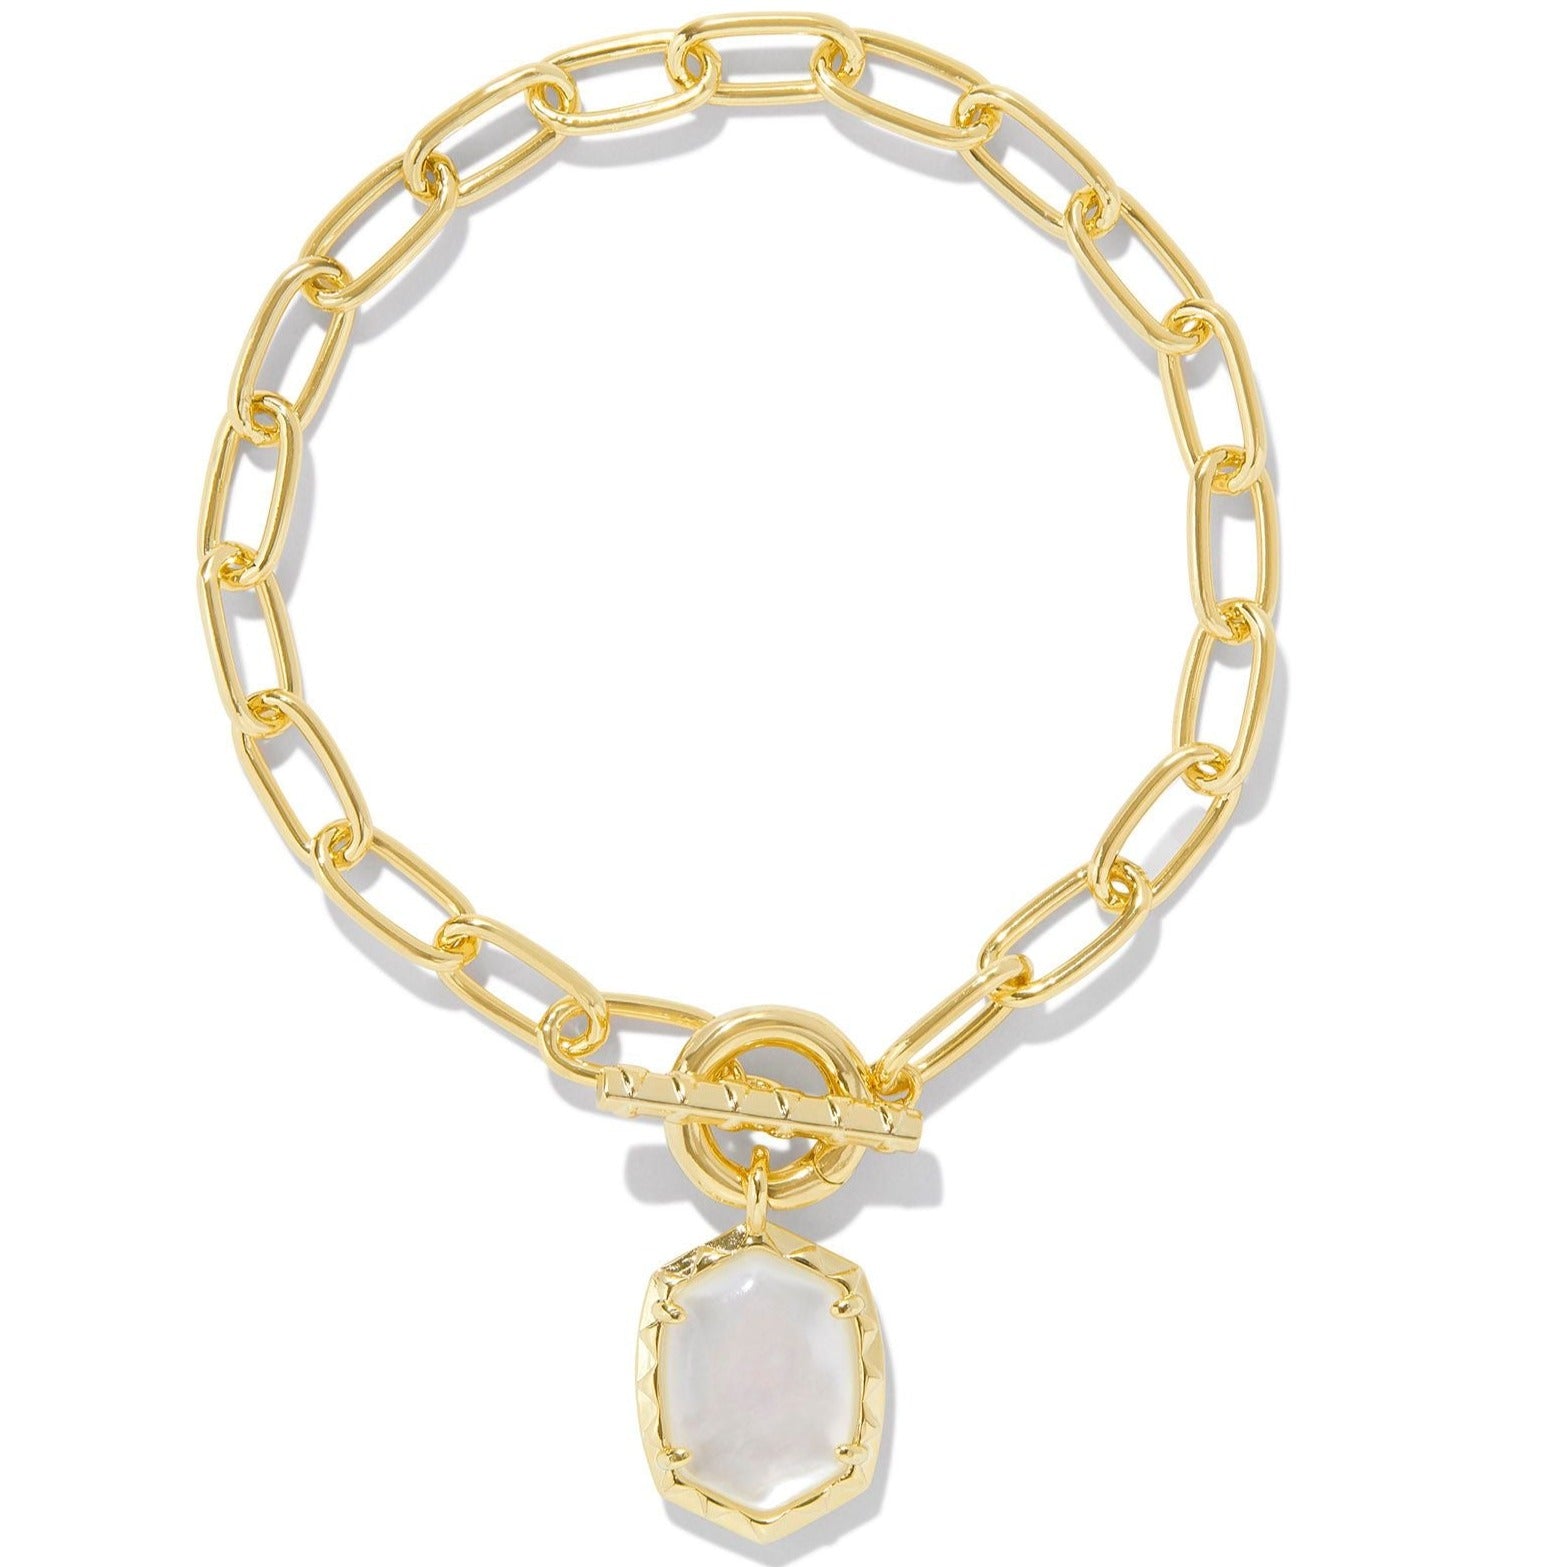 Kendra Scott | Daphne Gold Link and Chain Bracelet in Ivory Mother of Pearl - Giddy Up Glamour Boutique